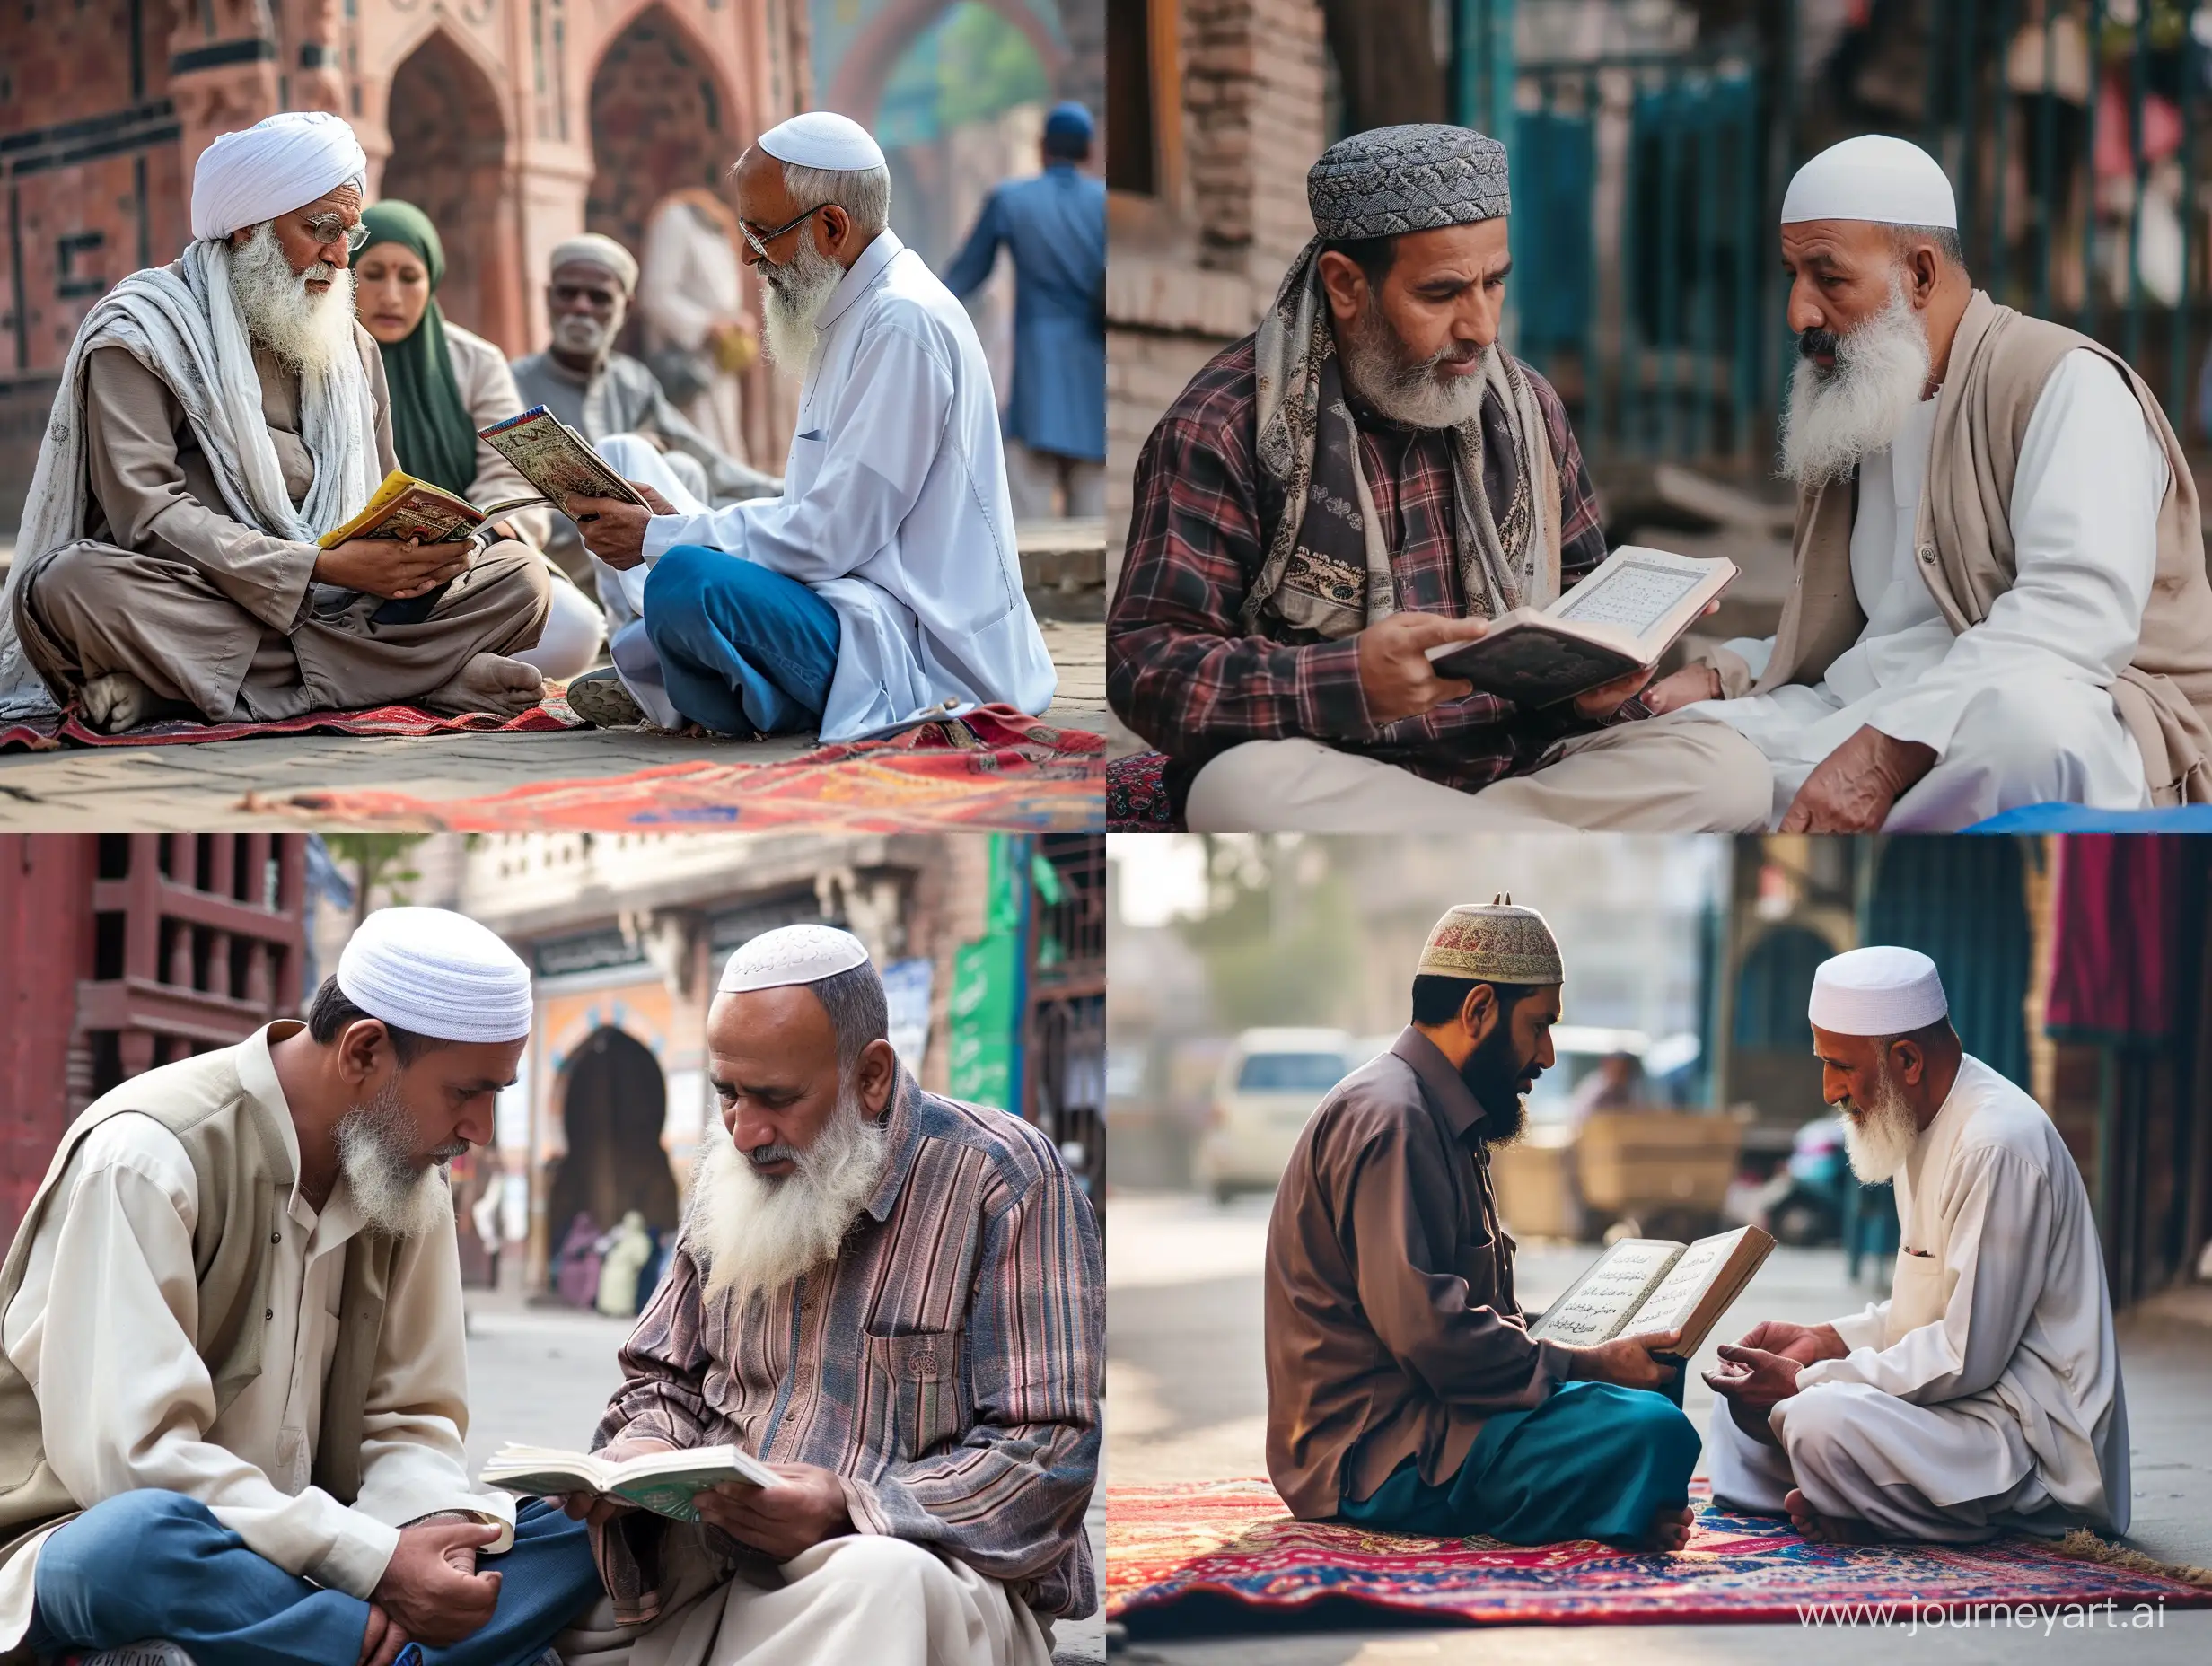 StreetStyle-Muslim-Teaching-Session-Near-a-Mosque